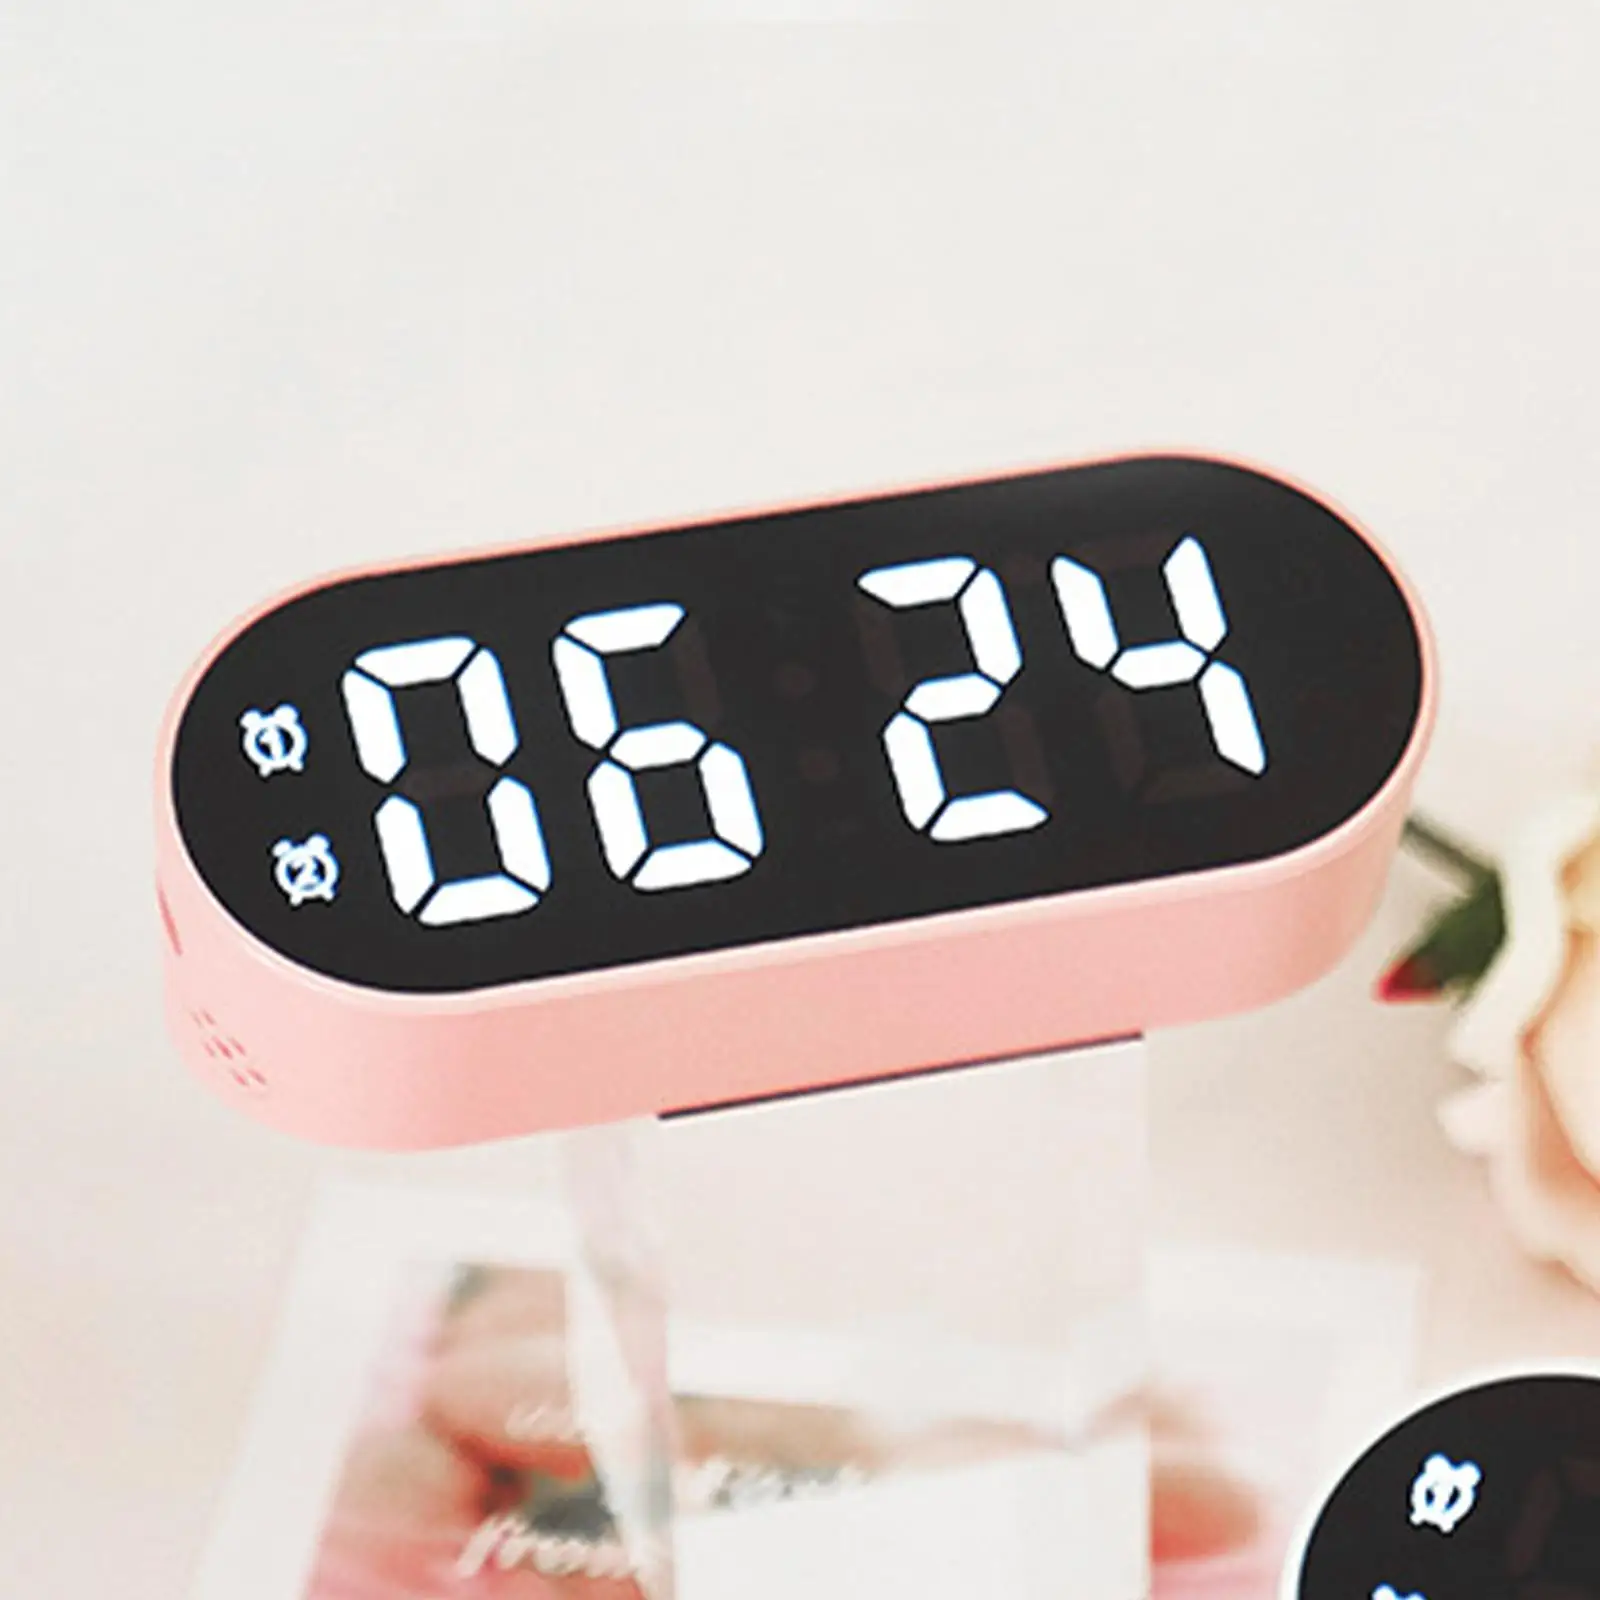 Digital Alarm Clock Electronic Clock with Snooze Large Display with Temperature Date for Desktop Travel Bedside Office Kids